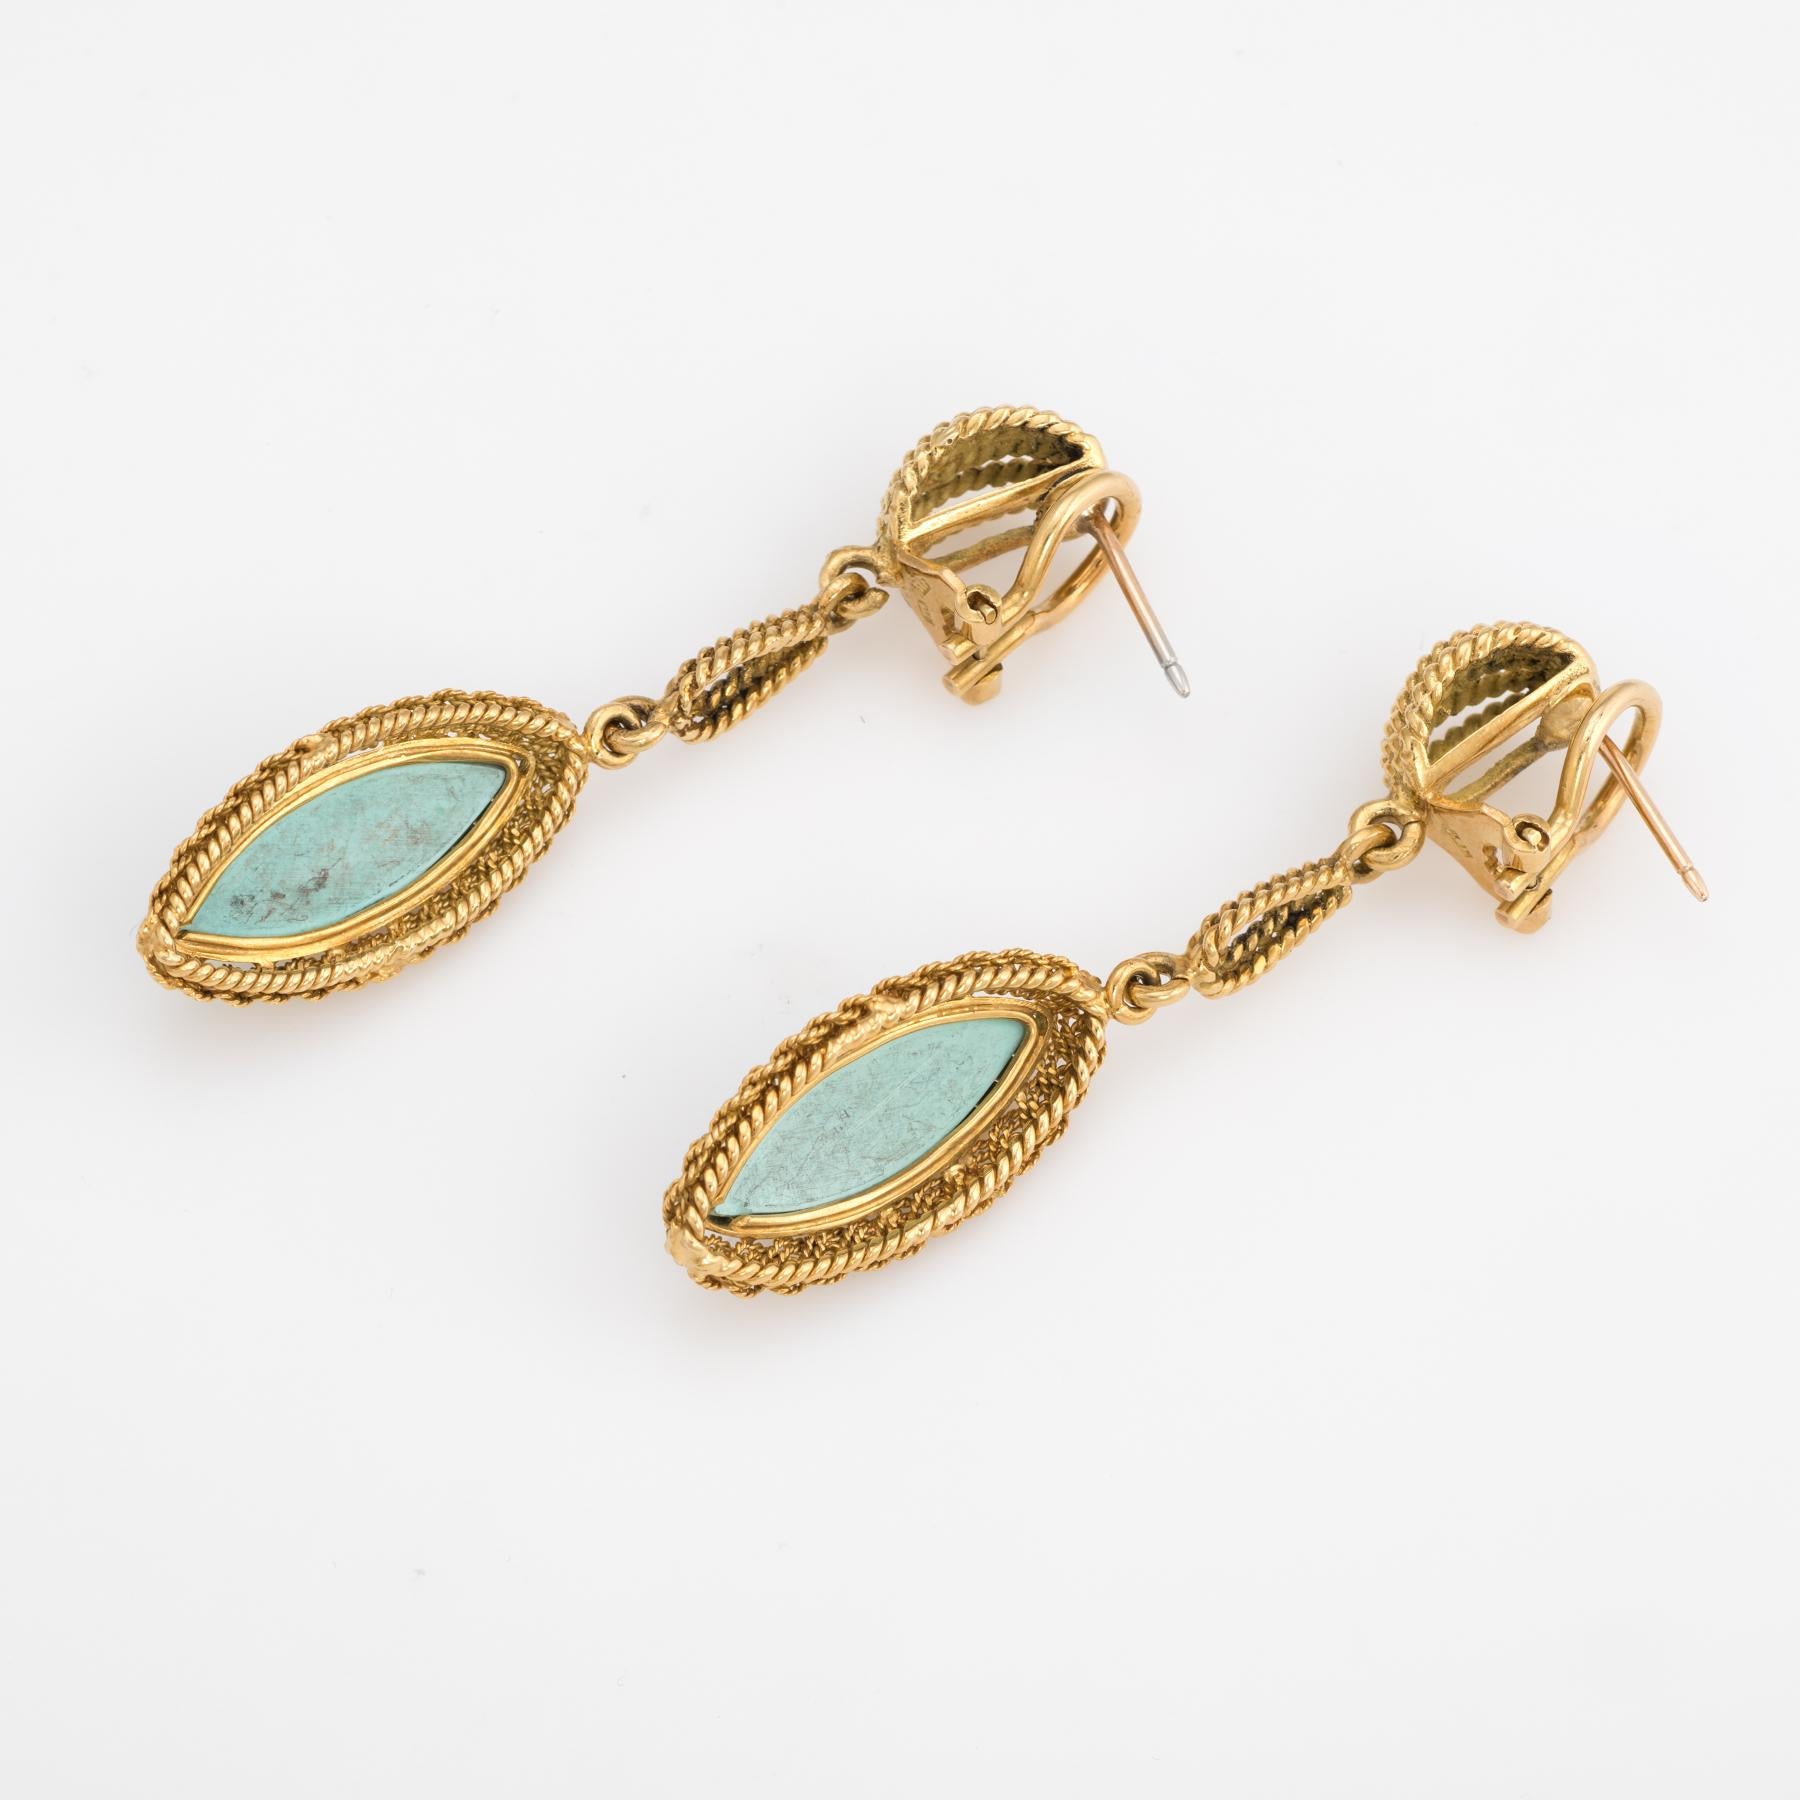 Elegant pair of vintage turquoise earrings (circa 1960s), crafted in 18k yellow gold. 

Cabochon cut turquoise measures 20mm x 7mm (estimated at 4 carats each - 8 carats total estimated weight). Note: slight chips and color variance to the